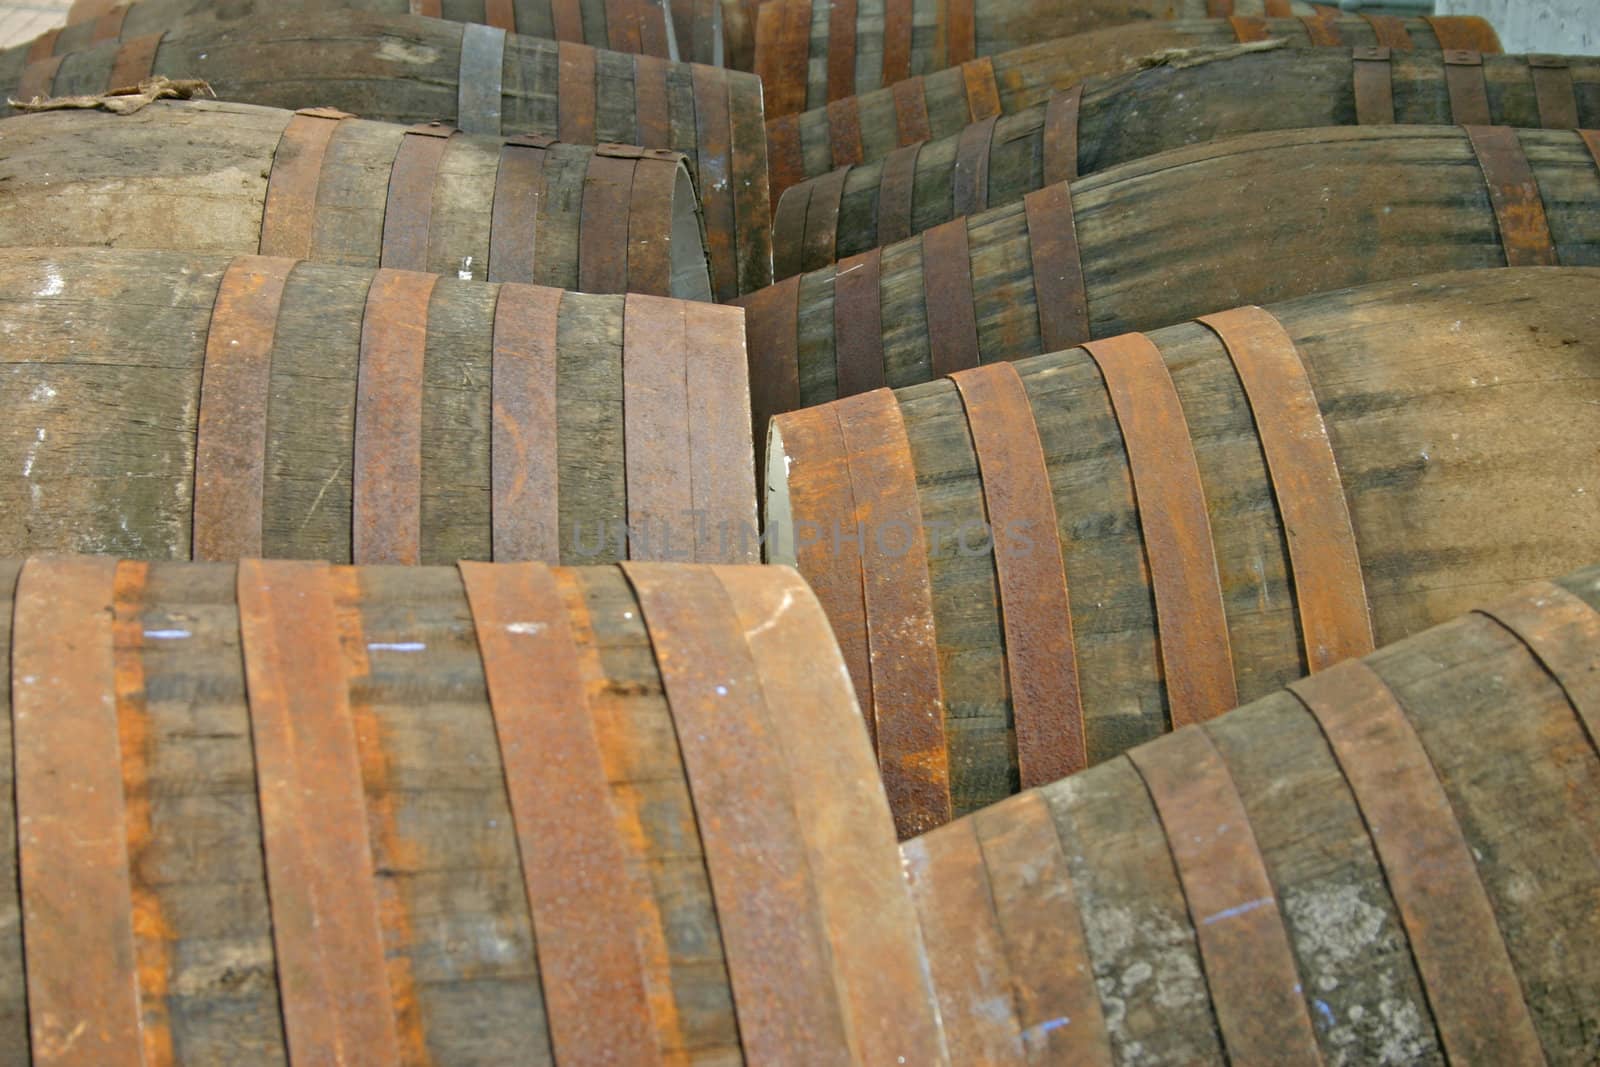 Whisky Barrels at Distillery in Scotland UK by green308